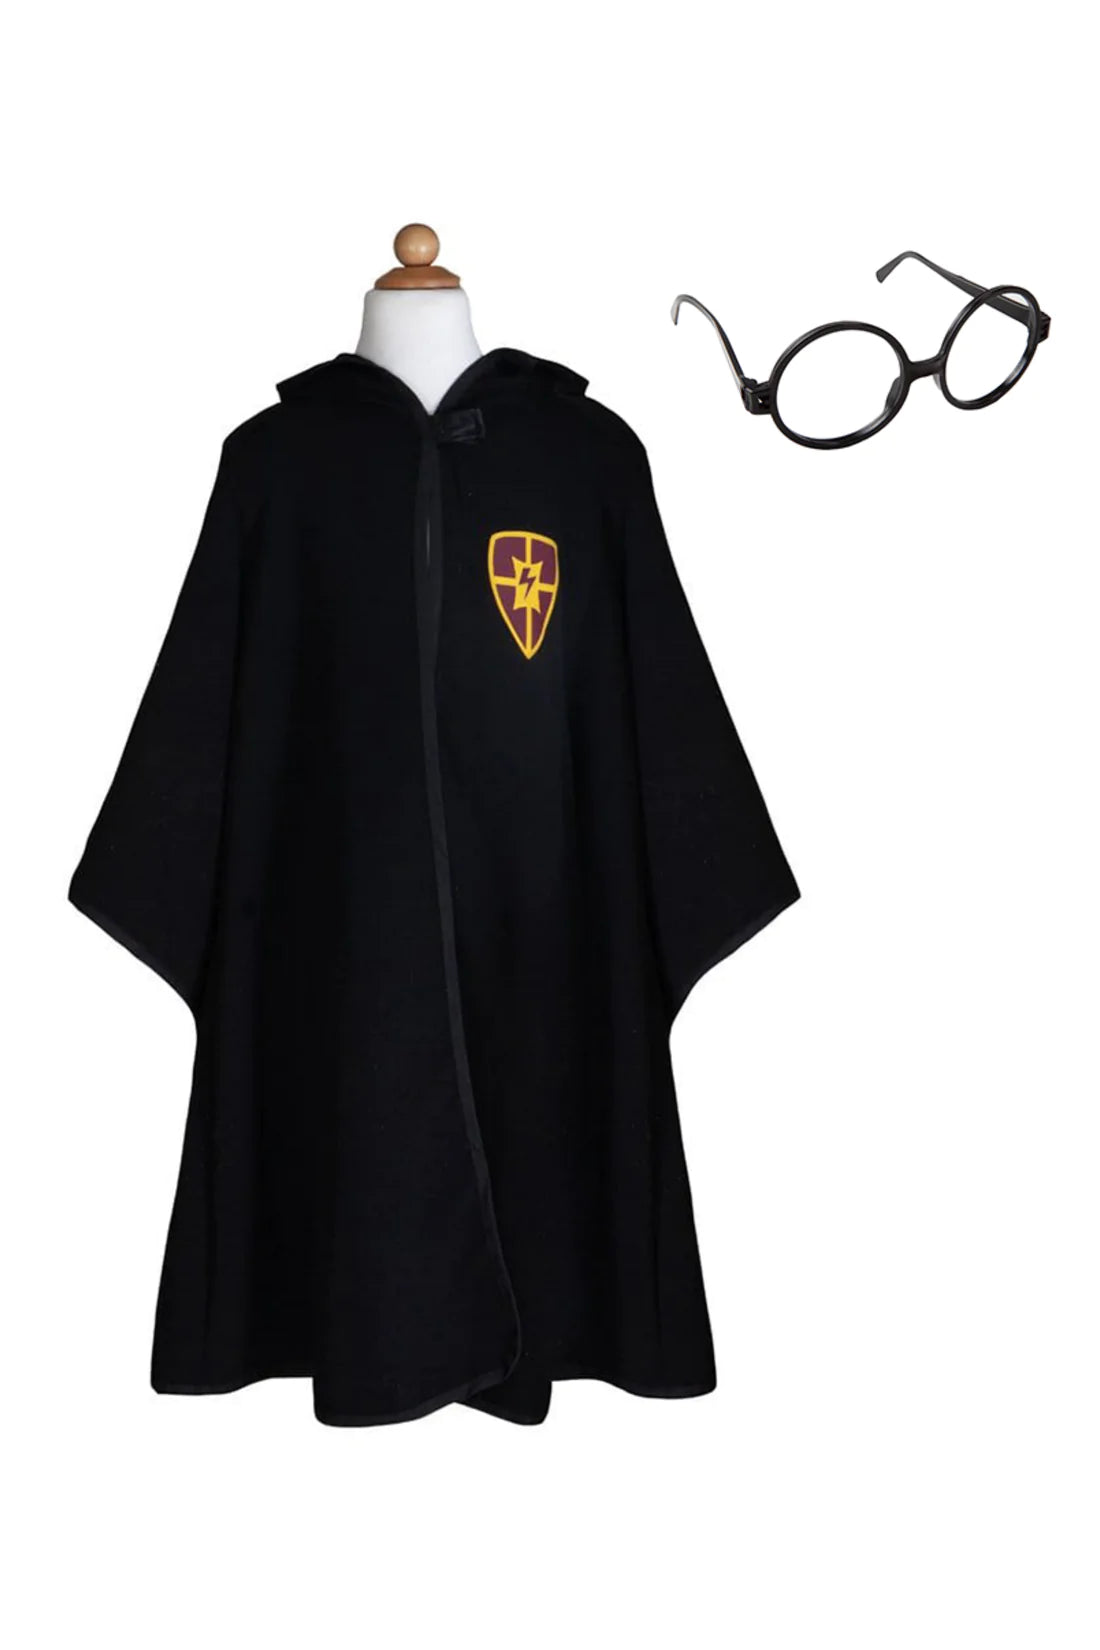 wizard cloak and glasses